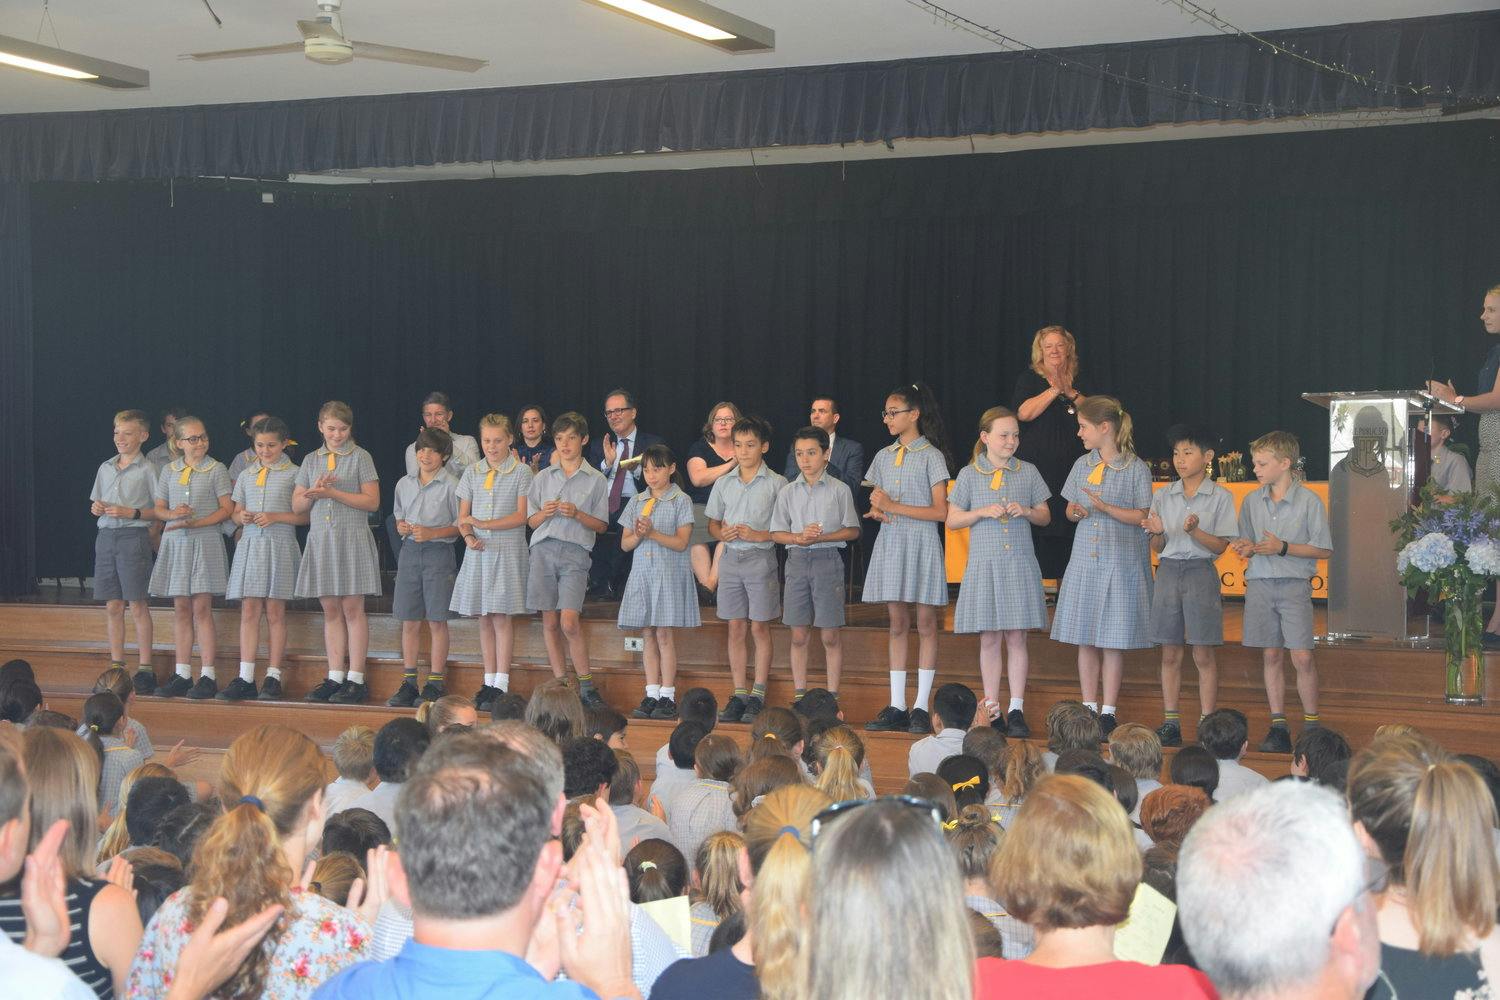 Students from Pymble Public School 